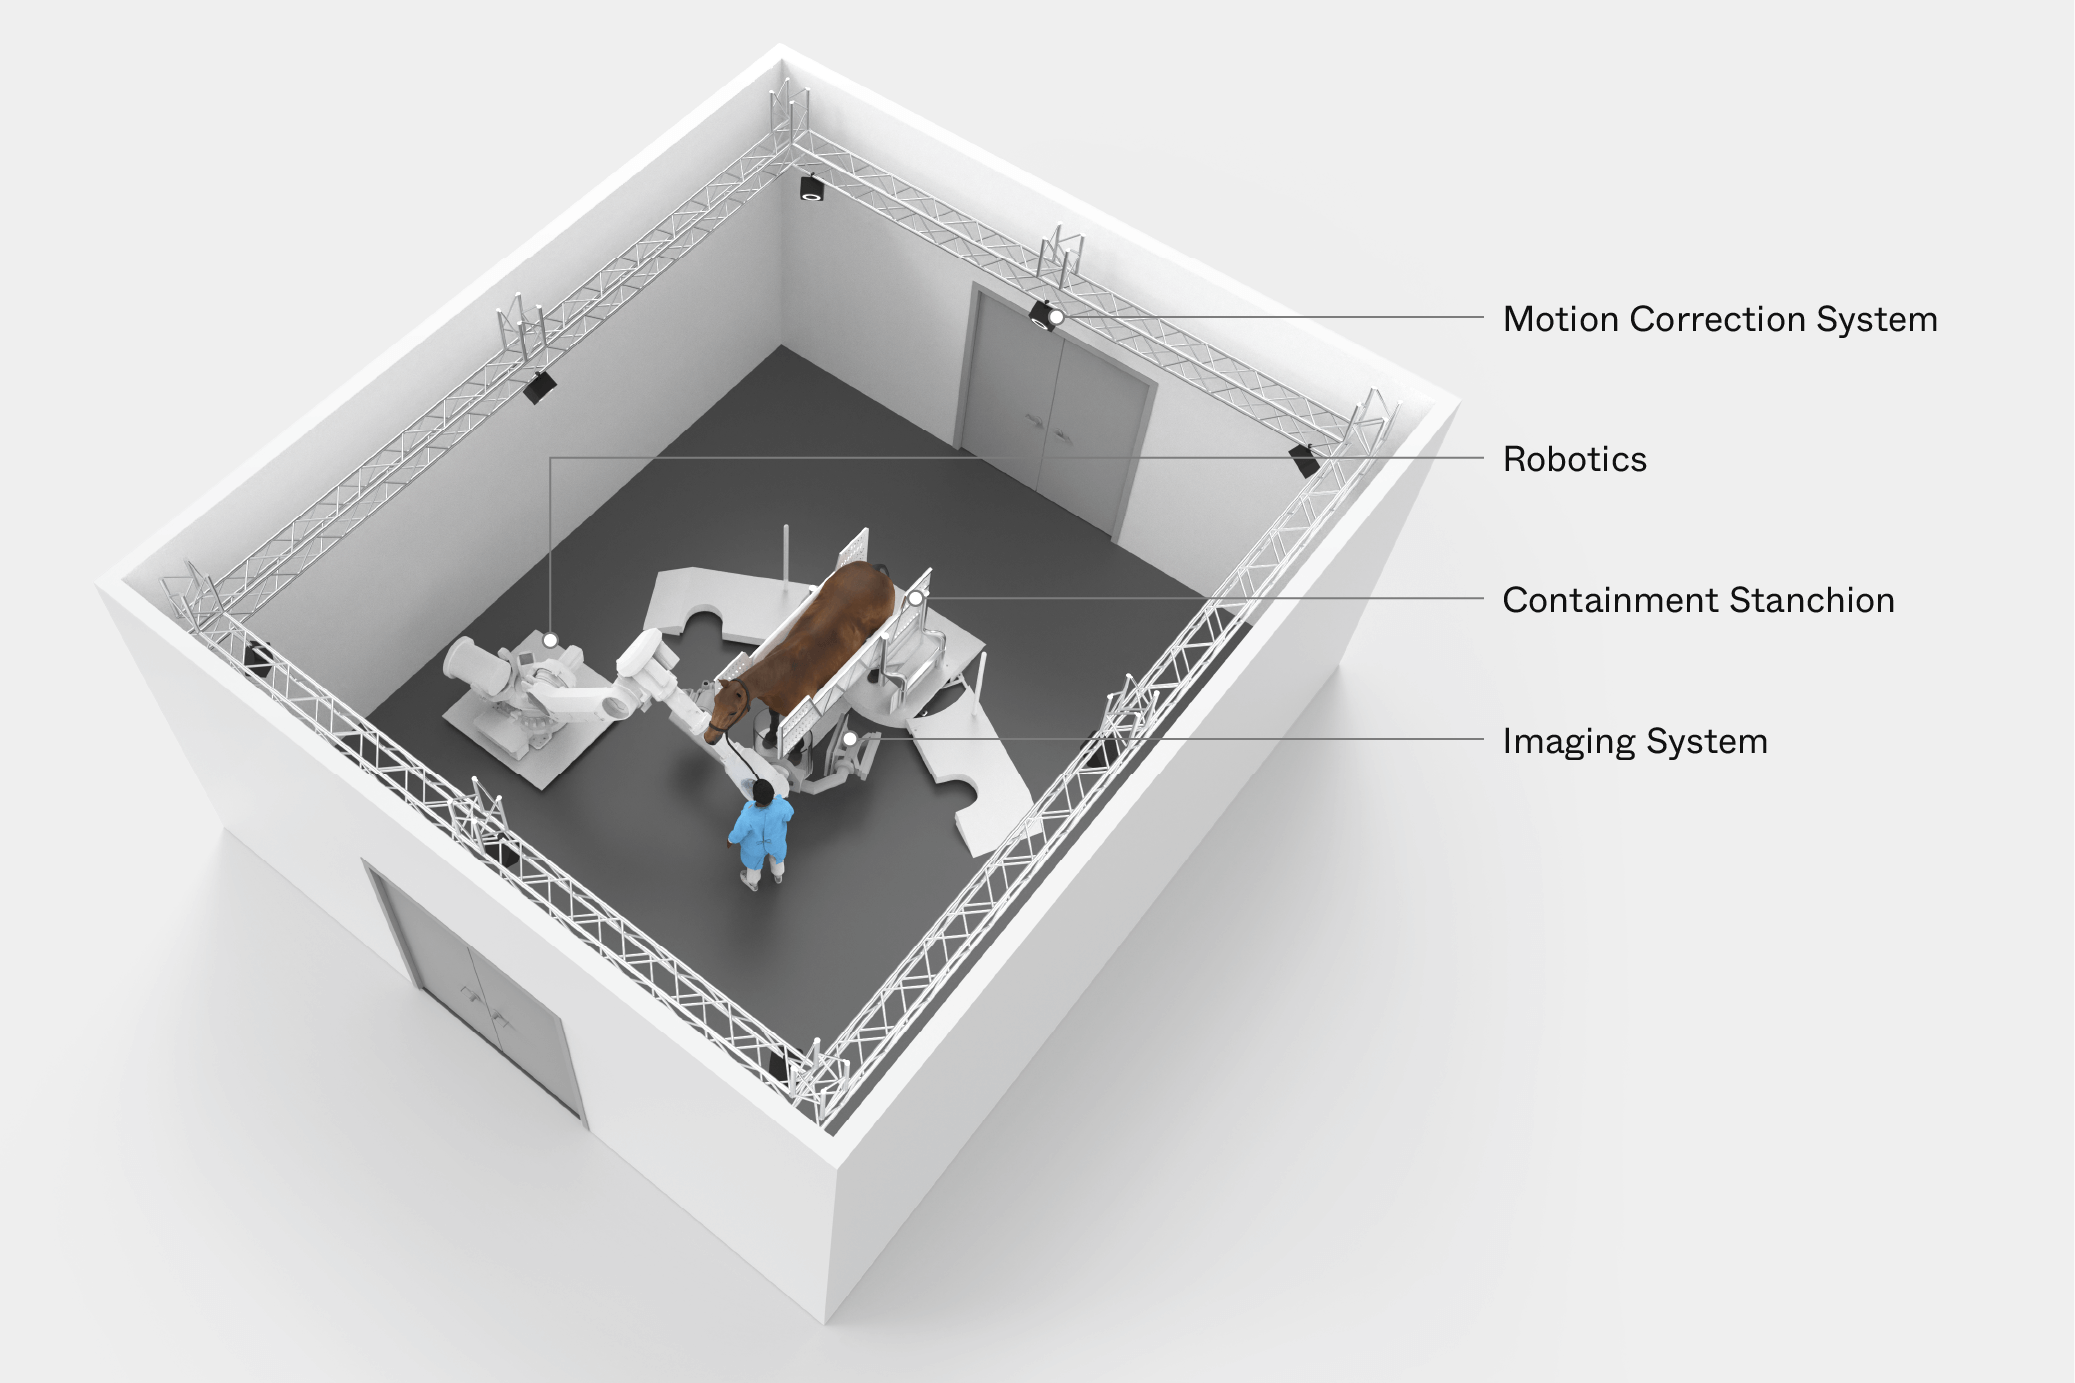 A 3d rendering of Prisma Imaging's fully system in a room, highlighting various components such as motion correction system, robotics, containment stanchion, and imaging system with horse and veterinarian in the center.